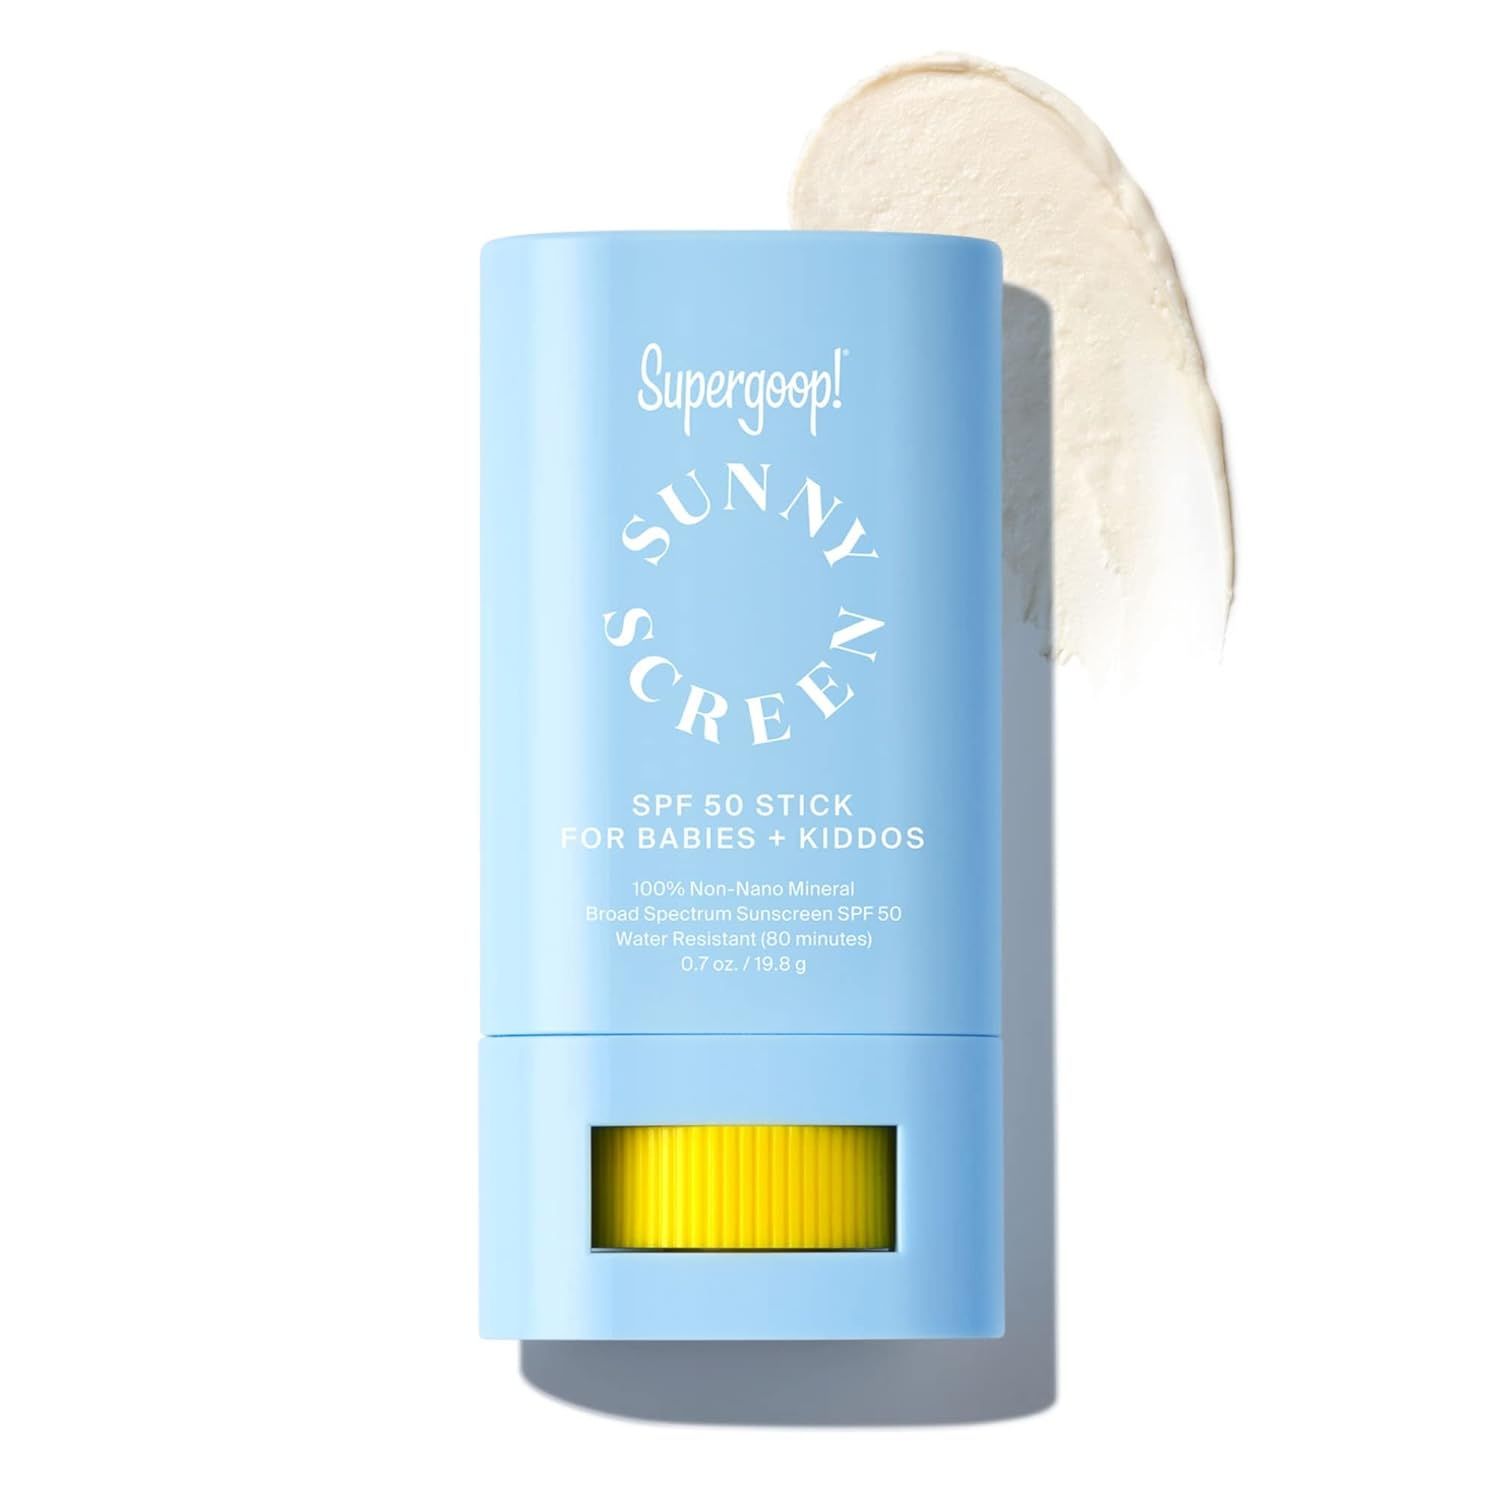 Supergoop! Sunnyscreen 100% Mineral Stick SPF 50, 0.7 oz - Face & Body Sunscreen for Babies & Kid... | Amazon (US)